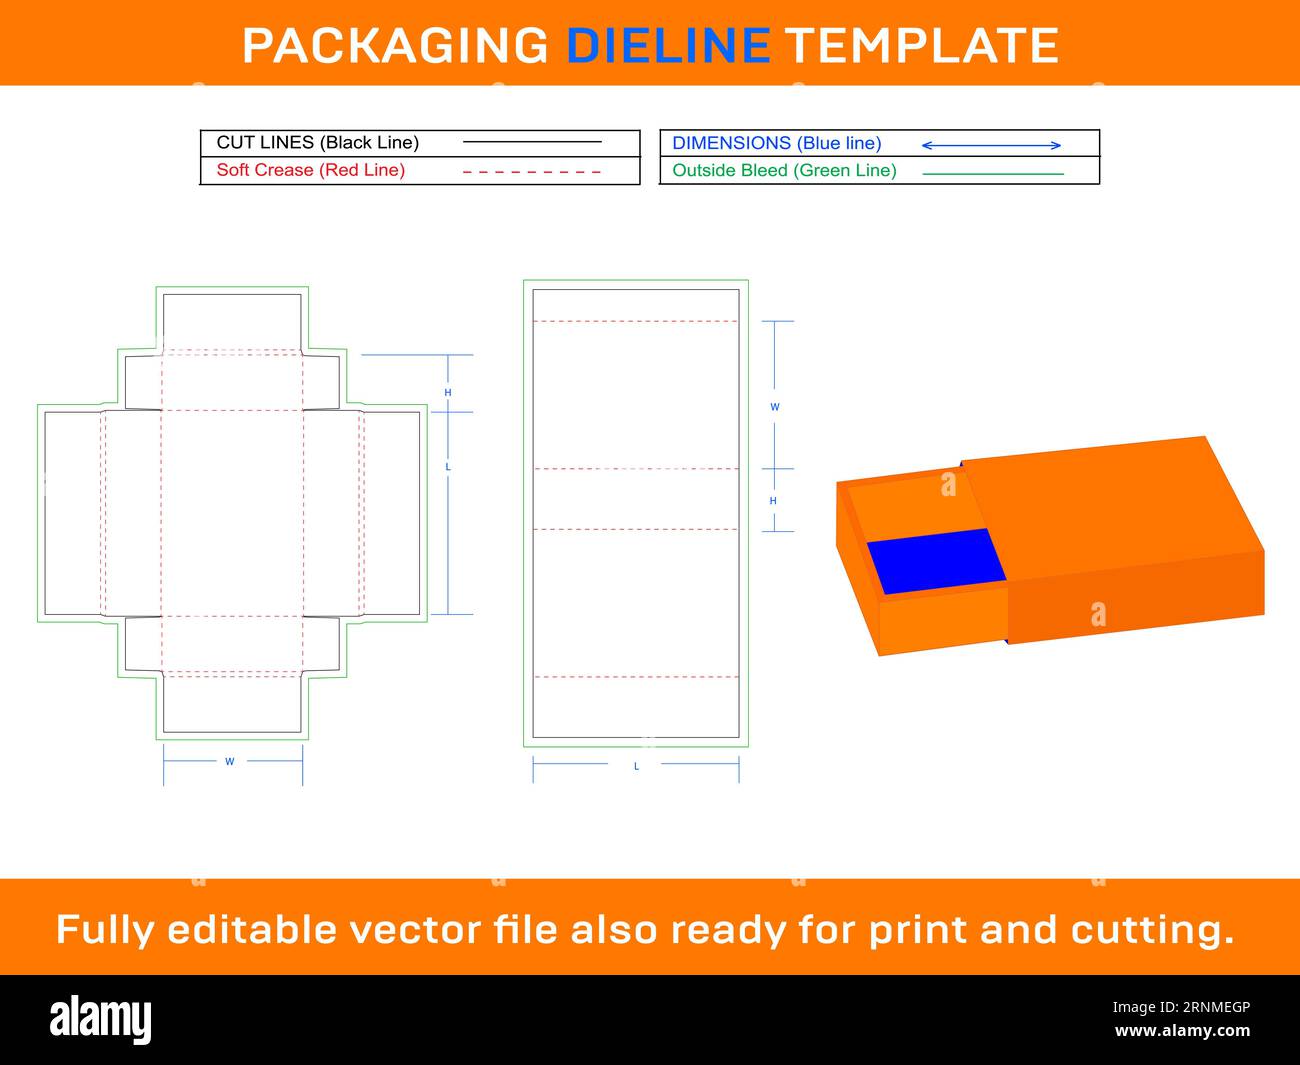 Customized Match Box, Die line Template With 3D Box Design Stock Vector